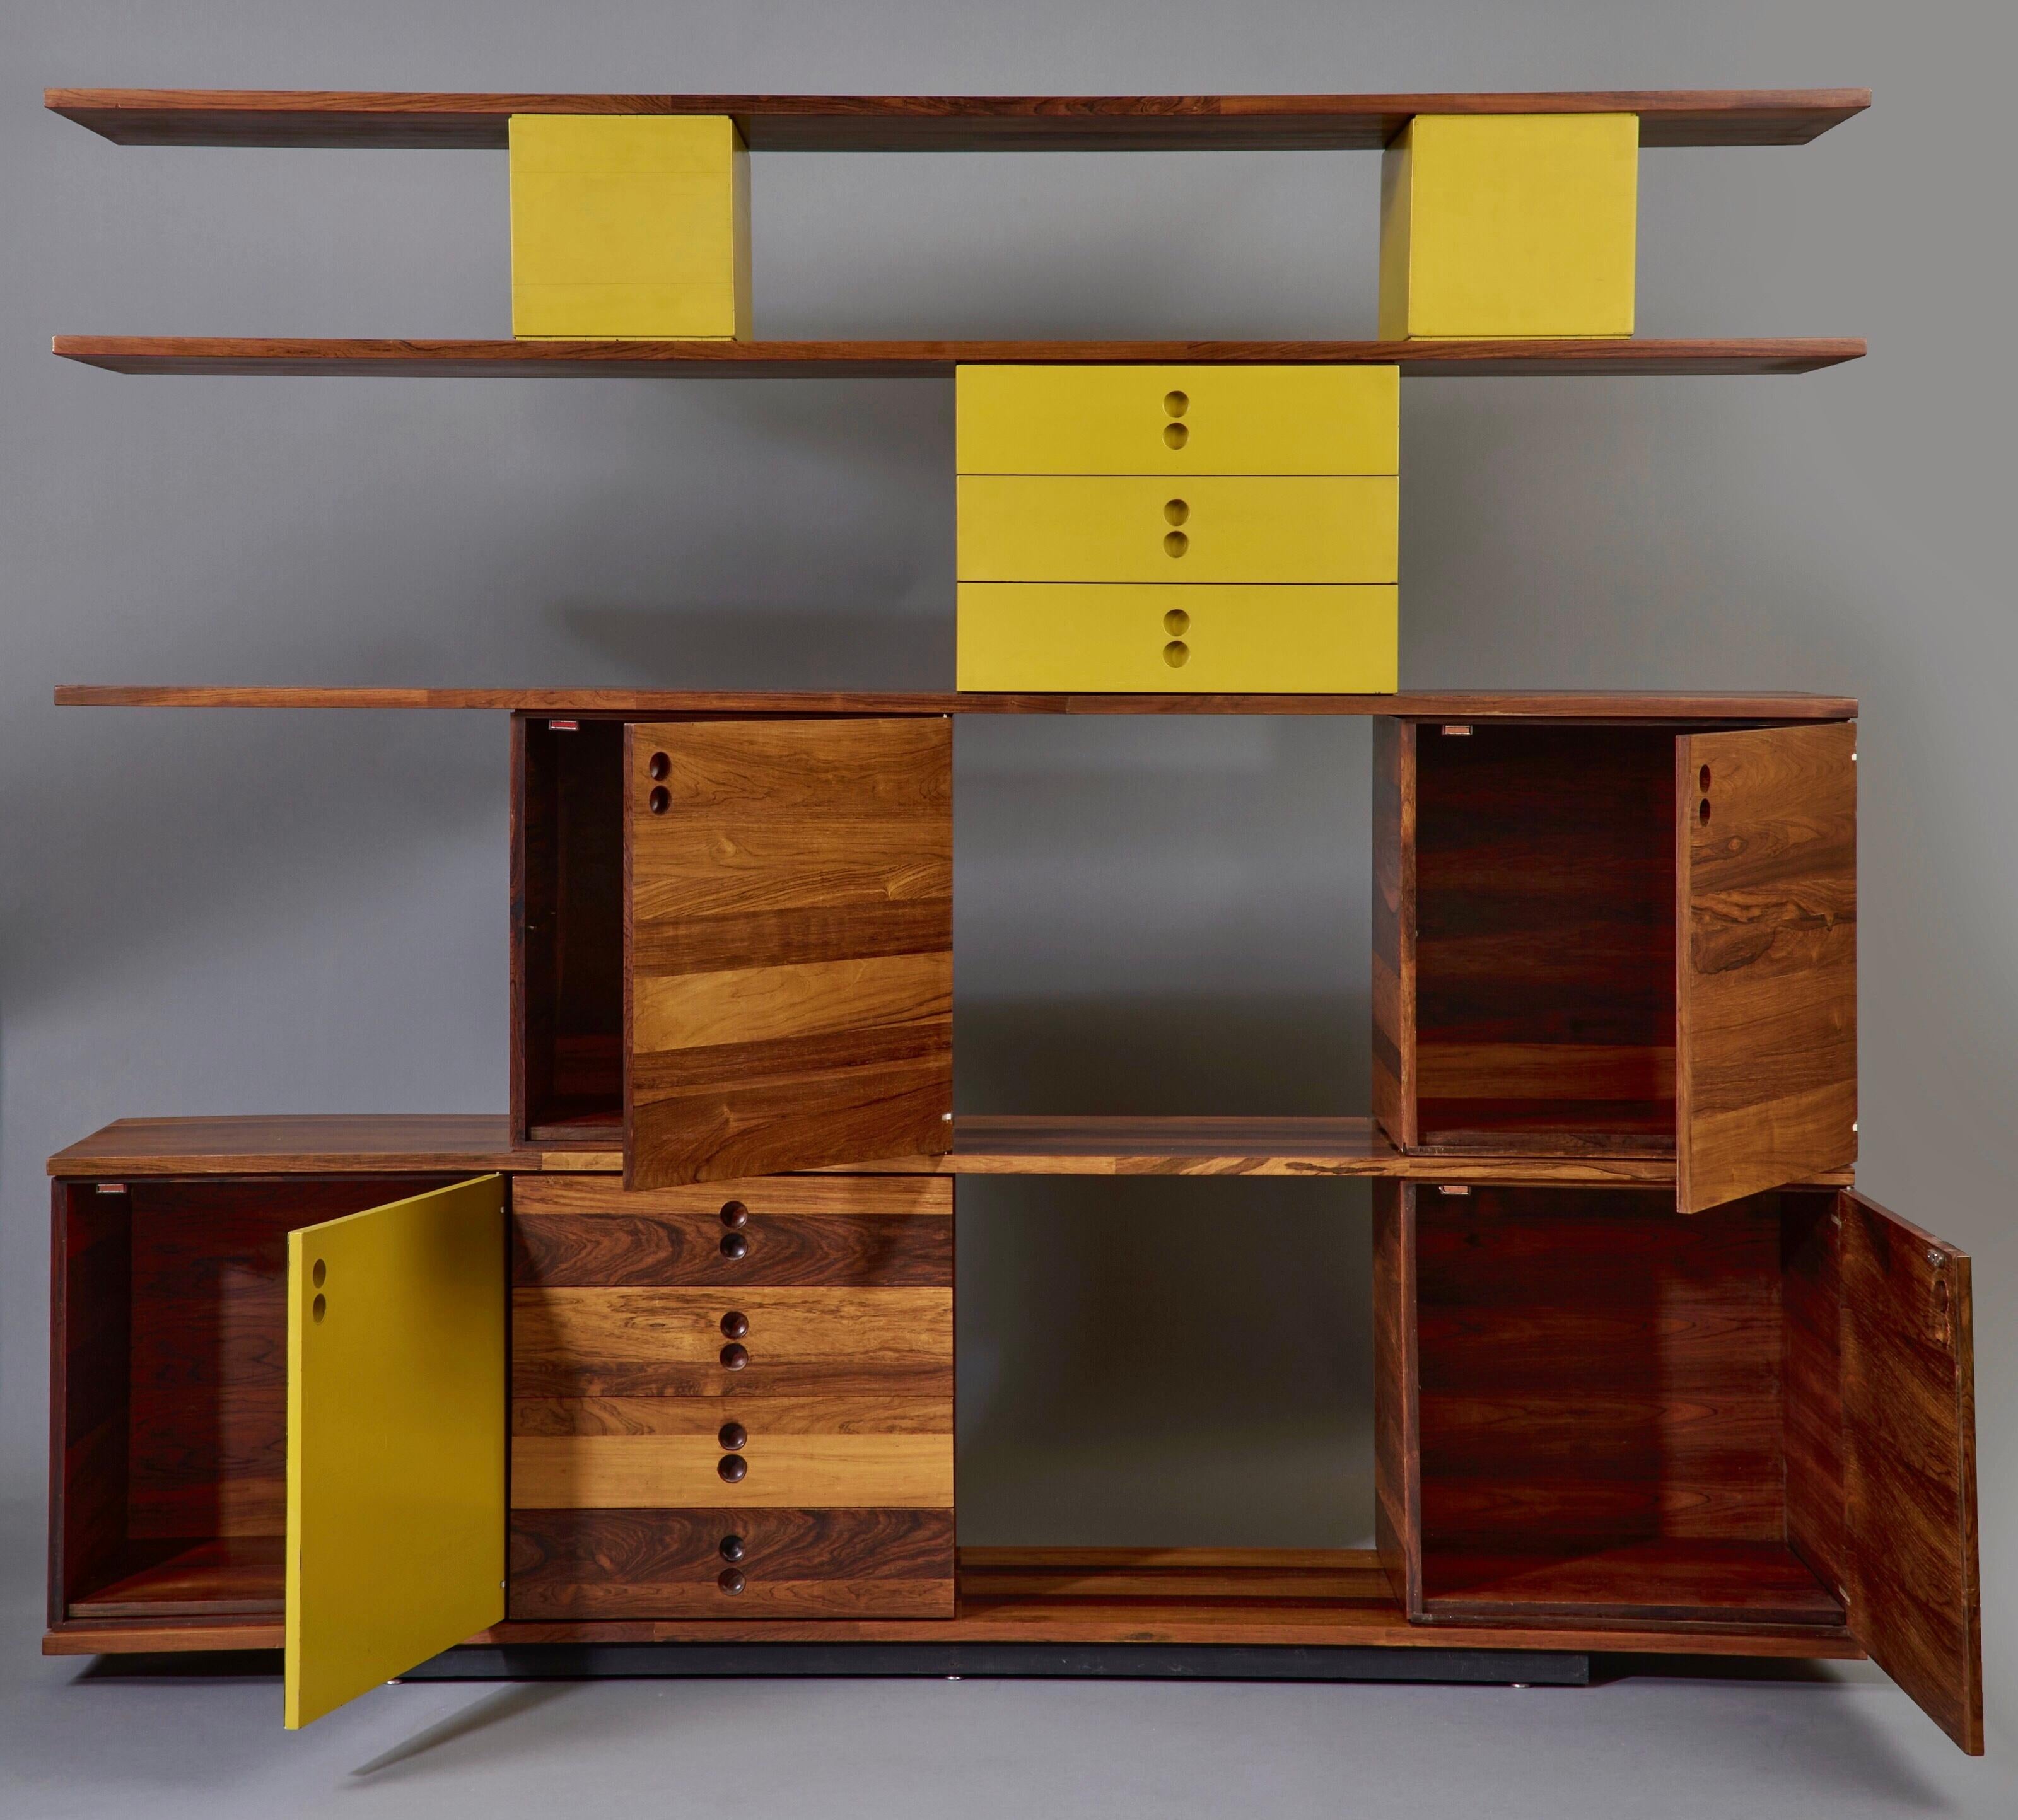 Wood Jorge Zalszupin, Exceptional Cabinet and Bookcase in Jacaranda, Brazil 1960s For Sale